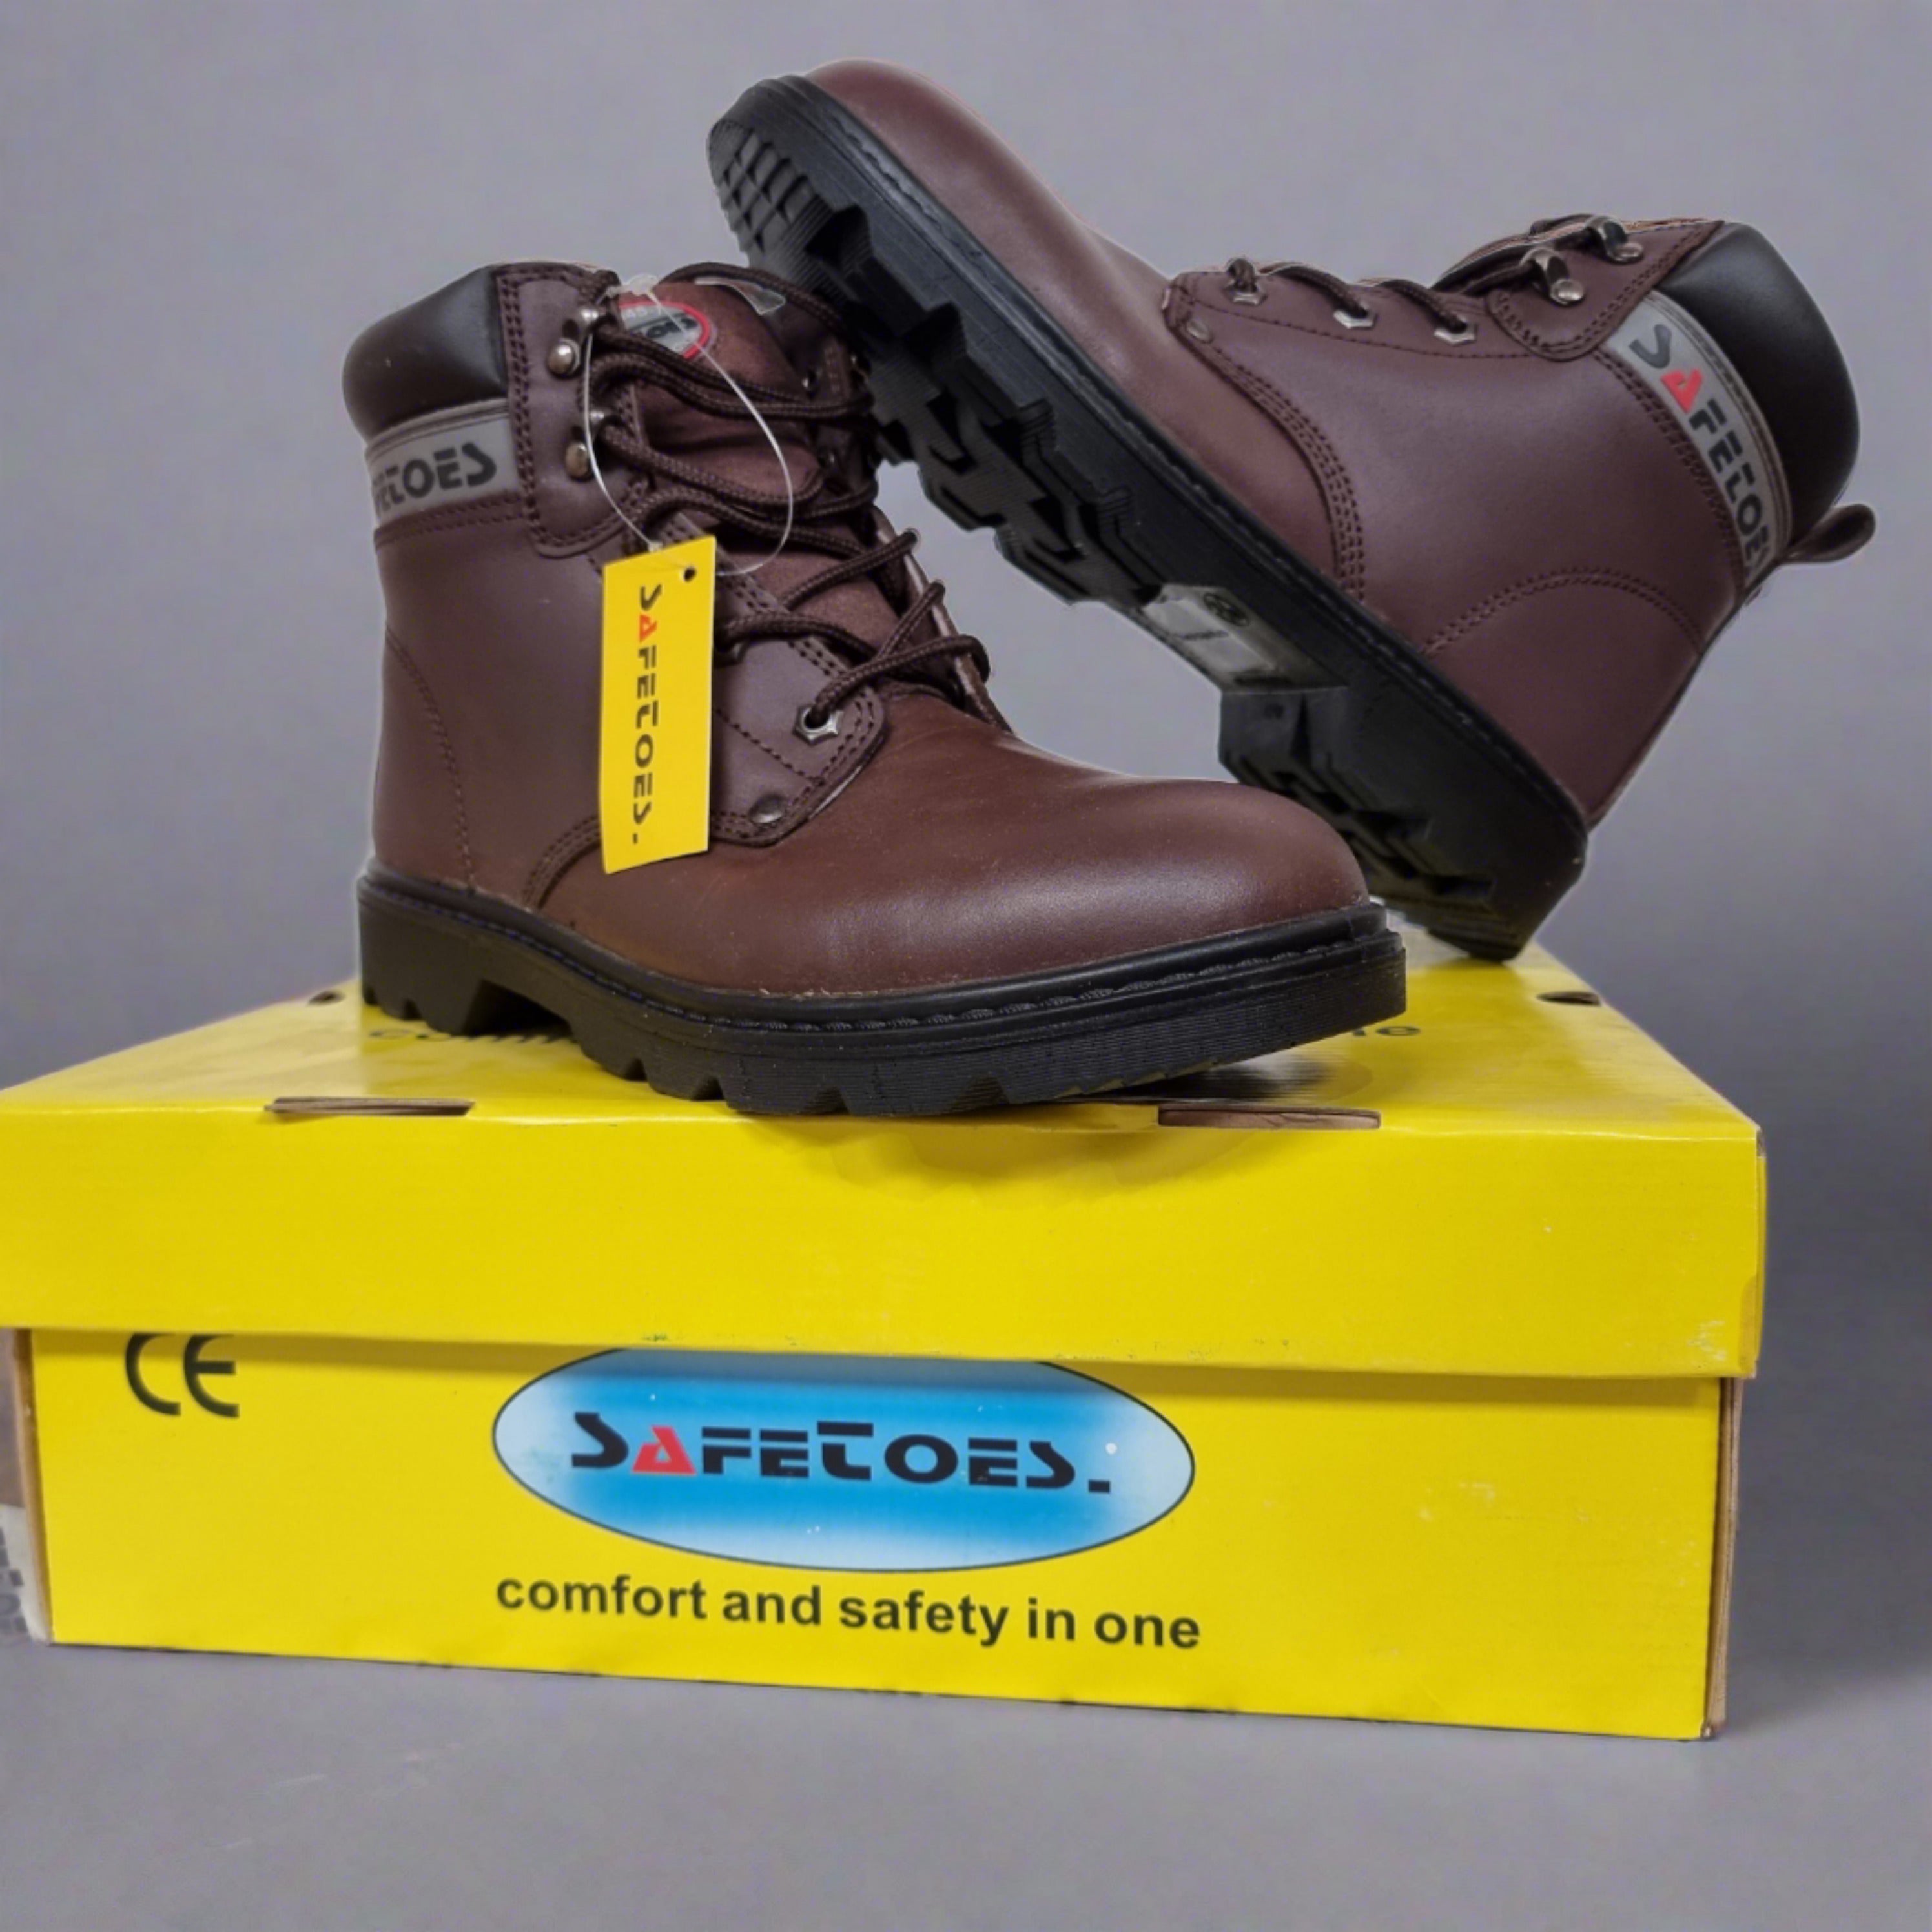 Safetoes S3002 Brown Leather Derby Safety Steel Toe Boots - UK Size 5